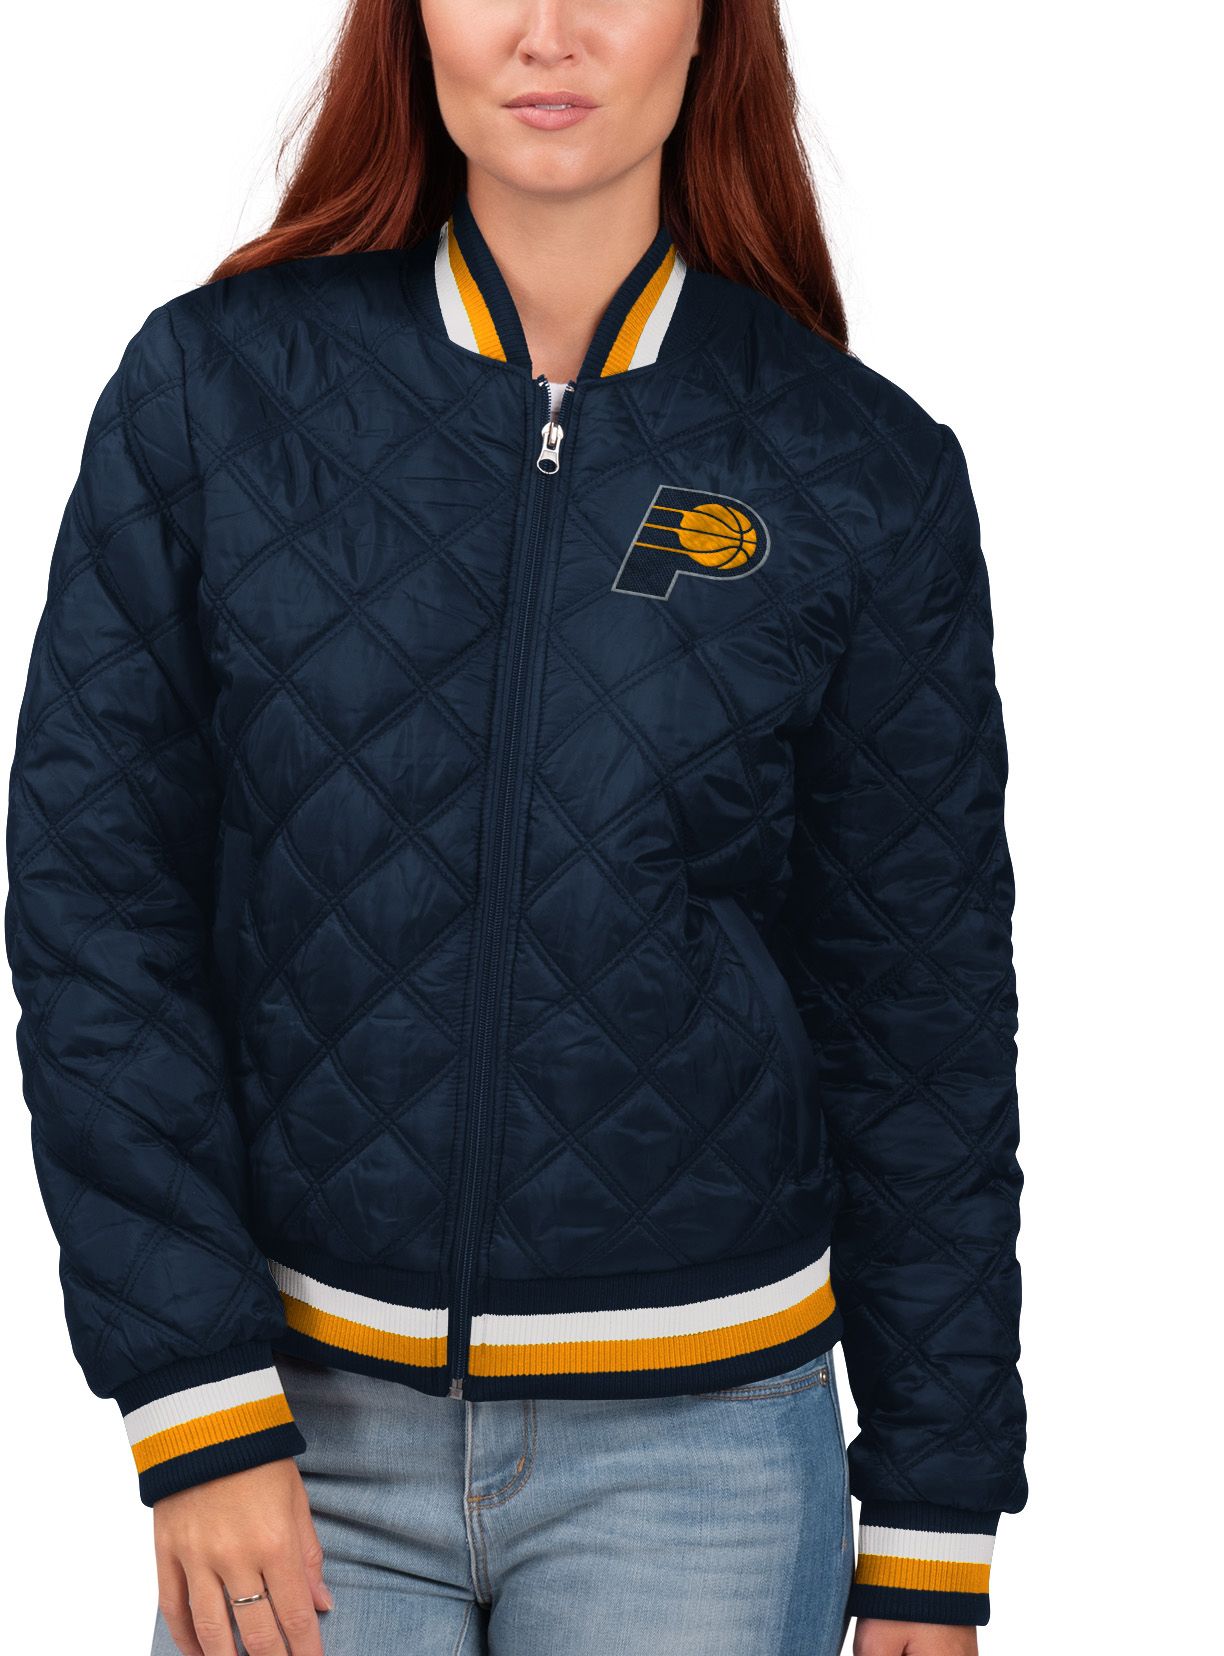 indiana pacers women's apparel